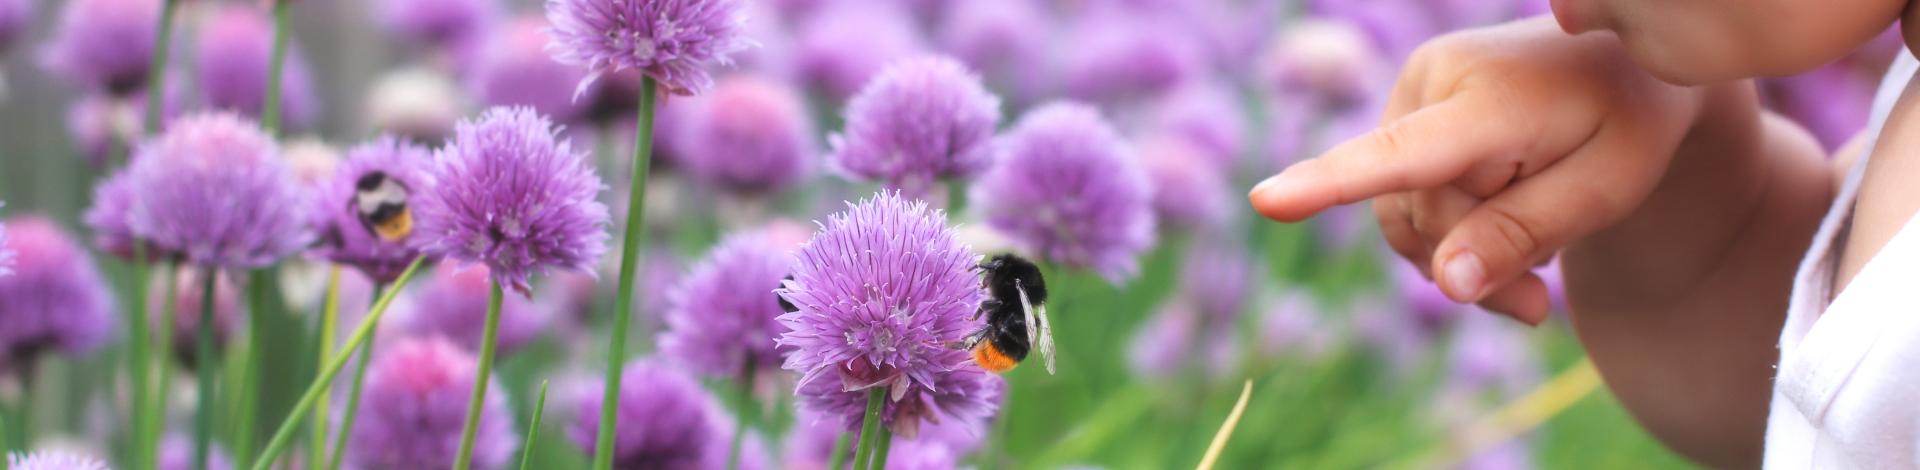 Child pointing to a bee on a chive flower among field of purple flowers